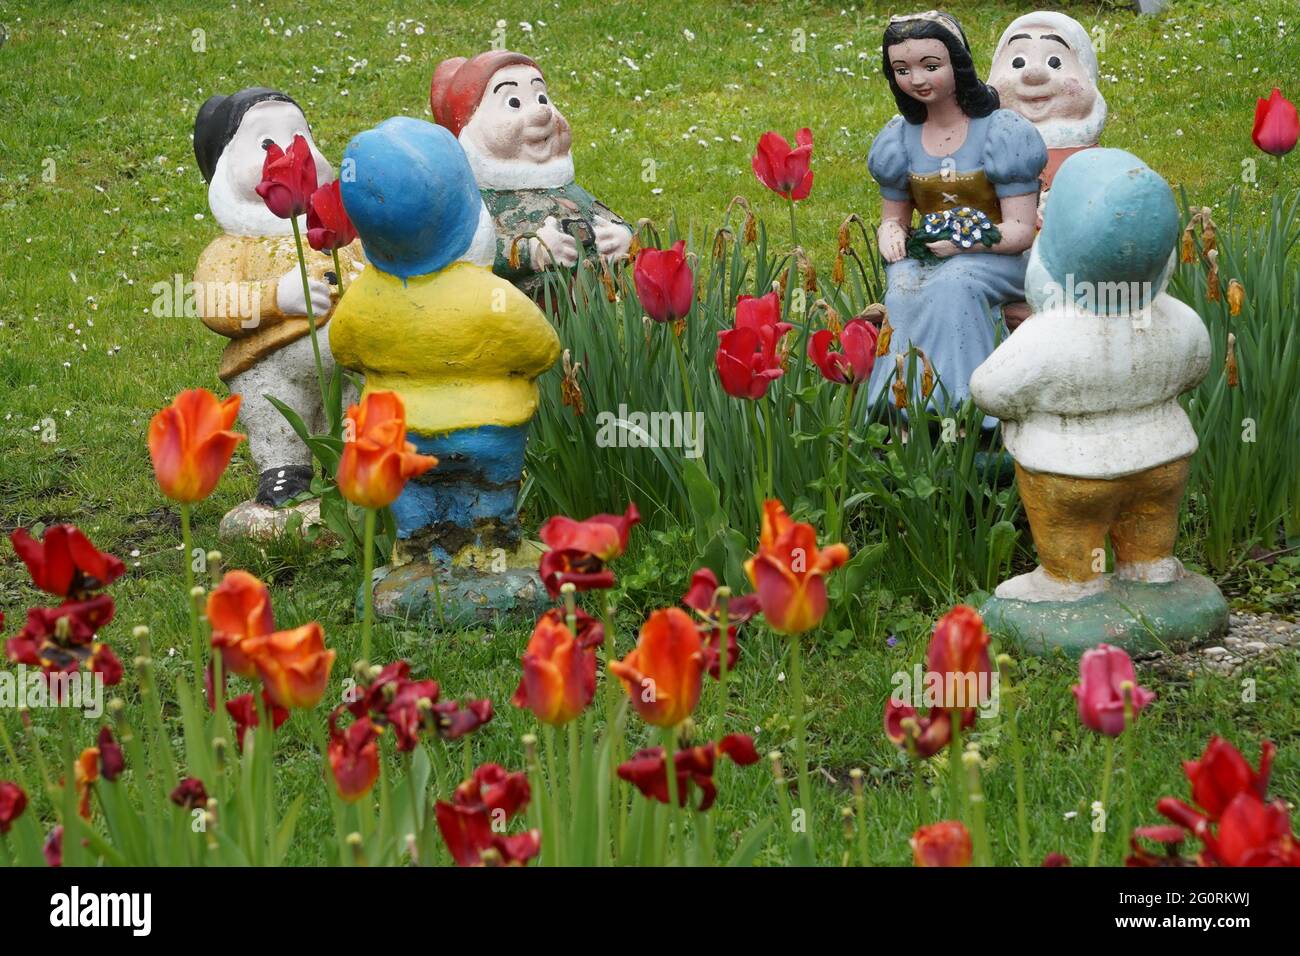 Garden statues of dwarfs and Snow White placed in grass and wilted tulips. Kitschy garden decoration. Stock Photo